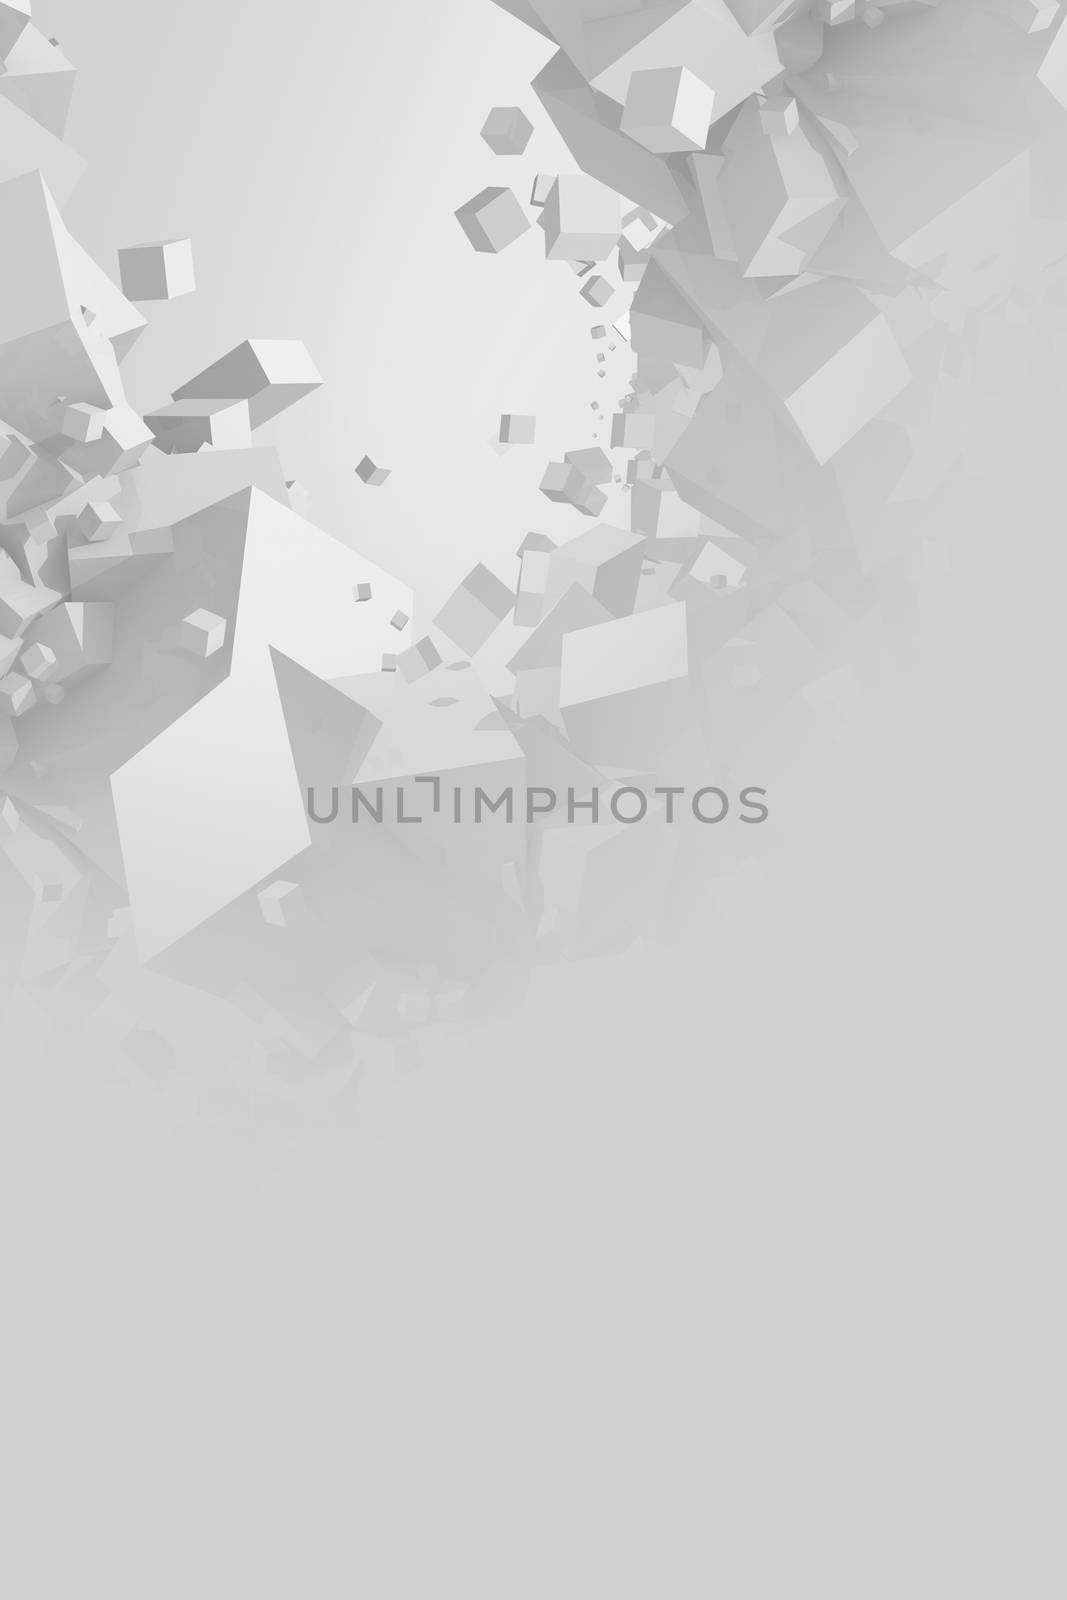 Gray Cubes Background by welcomia